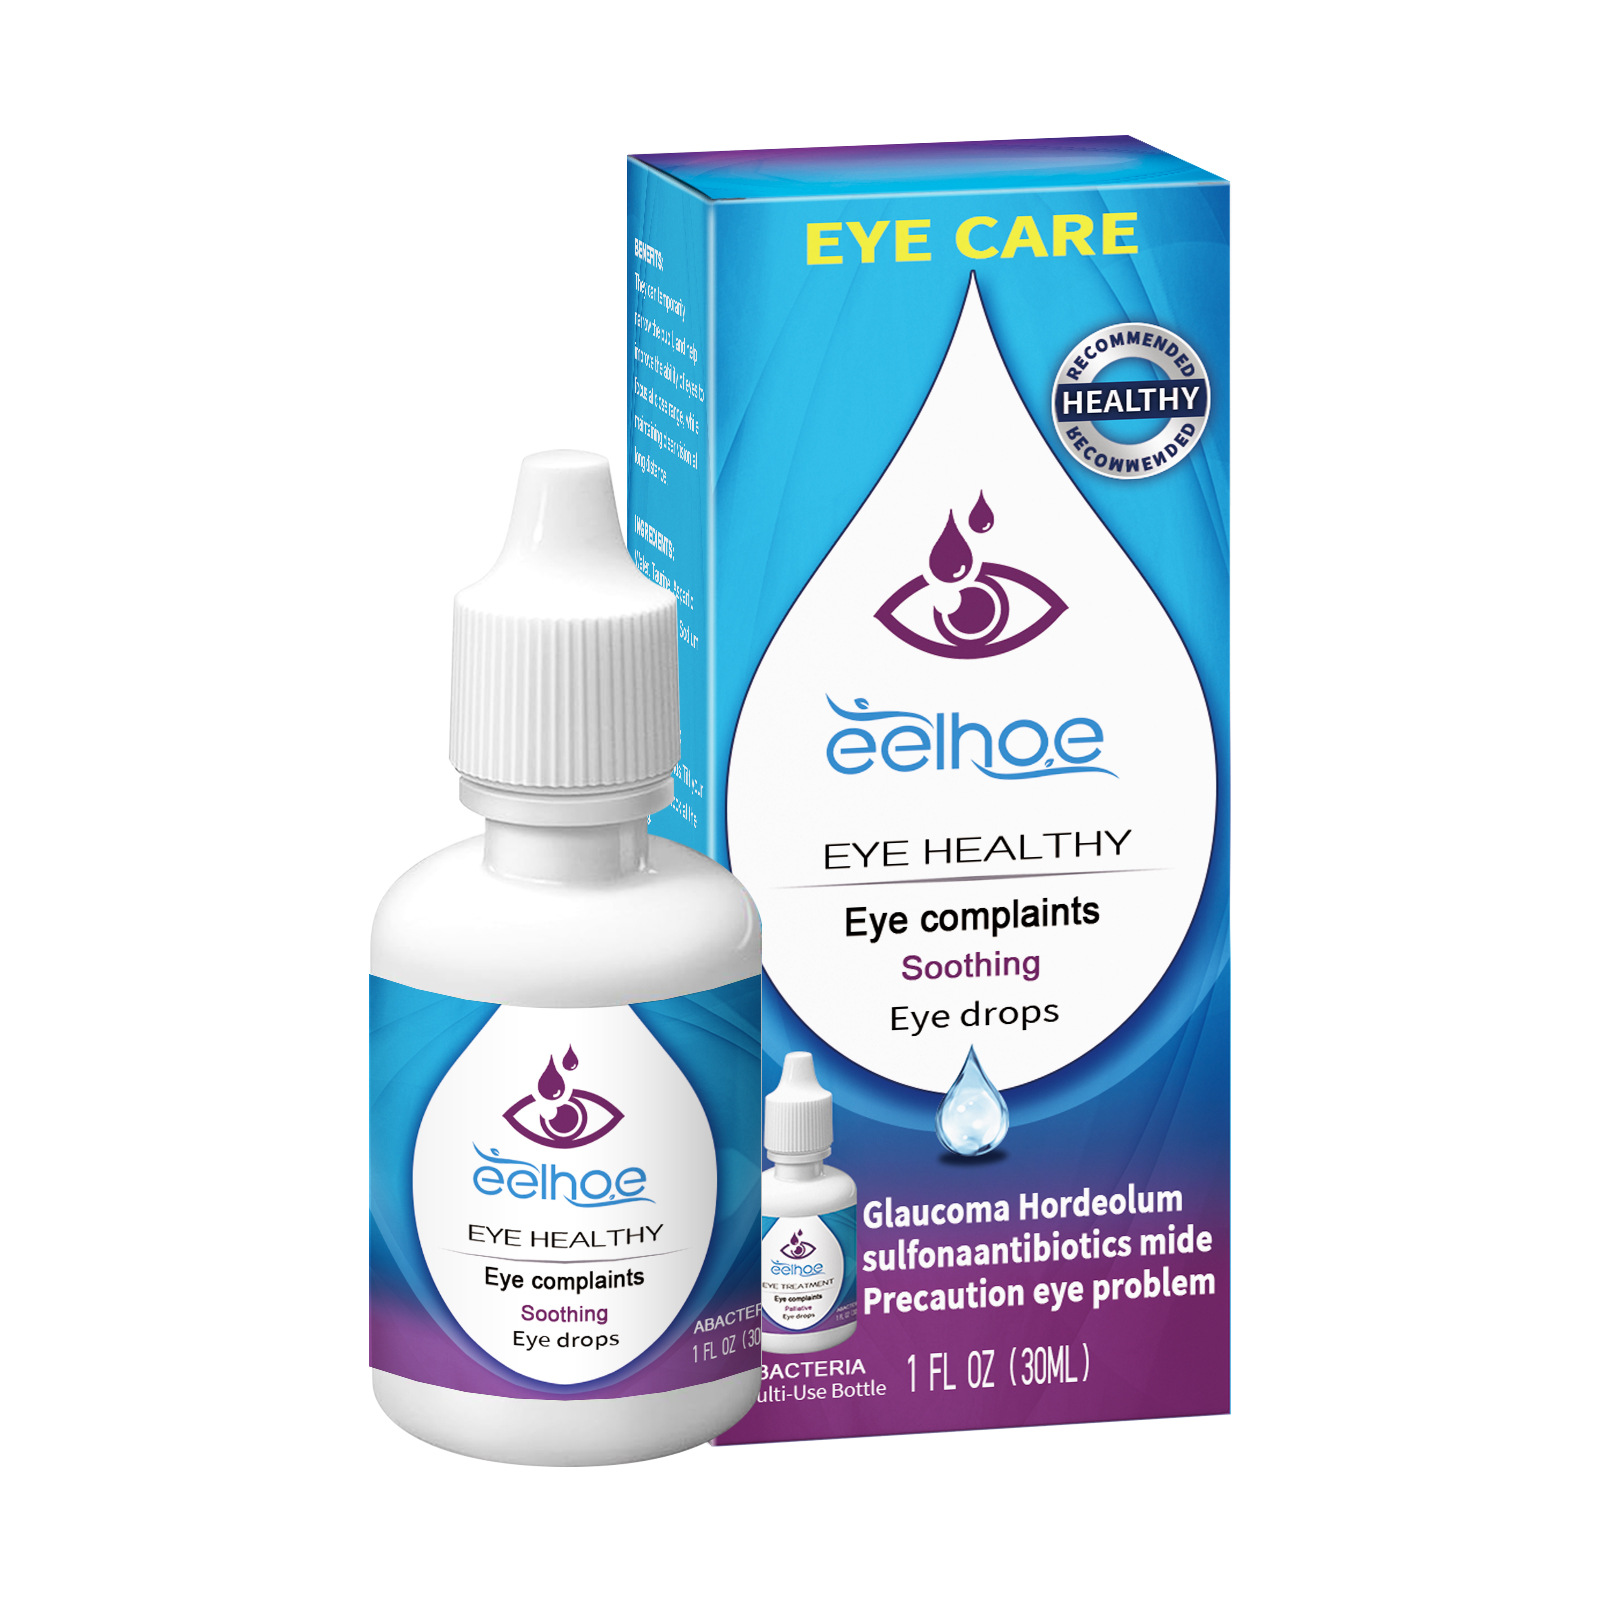 Eelhoe Eye Care Solution Relieve Eye Fatigue Dry Red Eye Vision Fuzzy Moisturizing Eye Care Solution